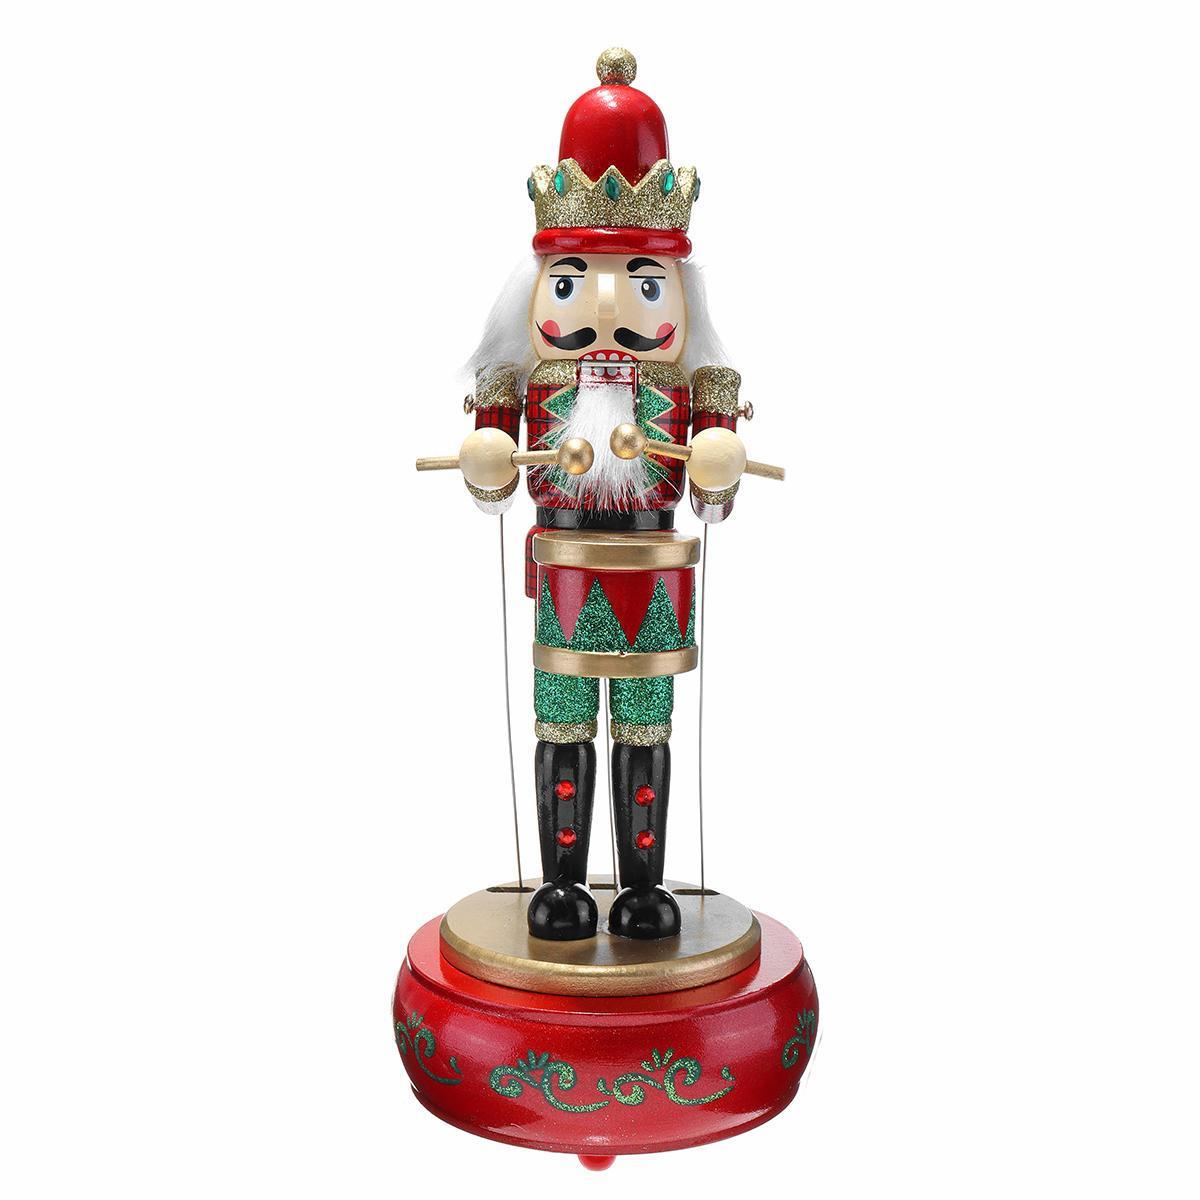 Wooden Guard Nutcracker Soldier Toy Music Box Christmas Decorations Xmas Gift